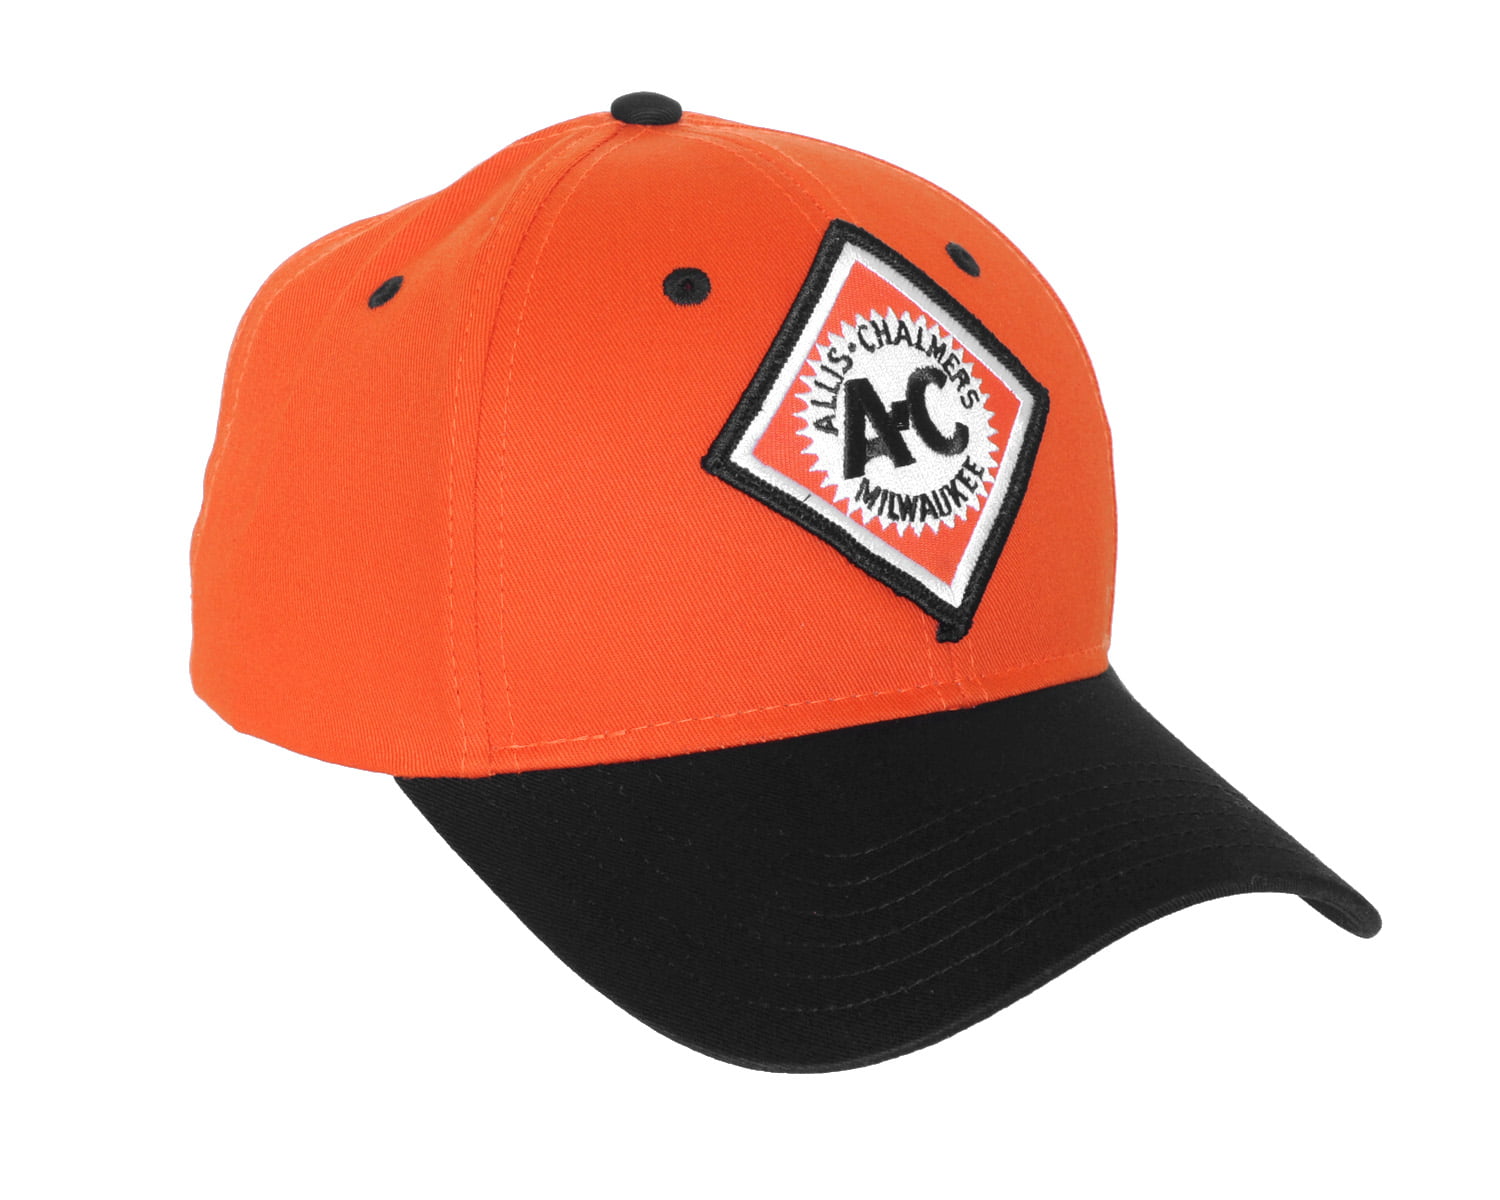 Allis Chalmers Tractor Cap New Logo Black Hat with Barbed Wire Accents Gift 